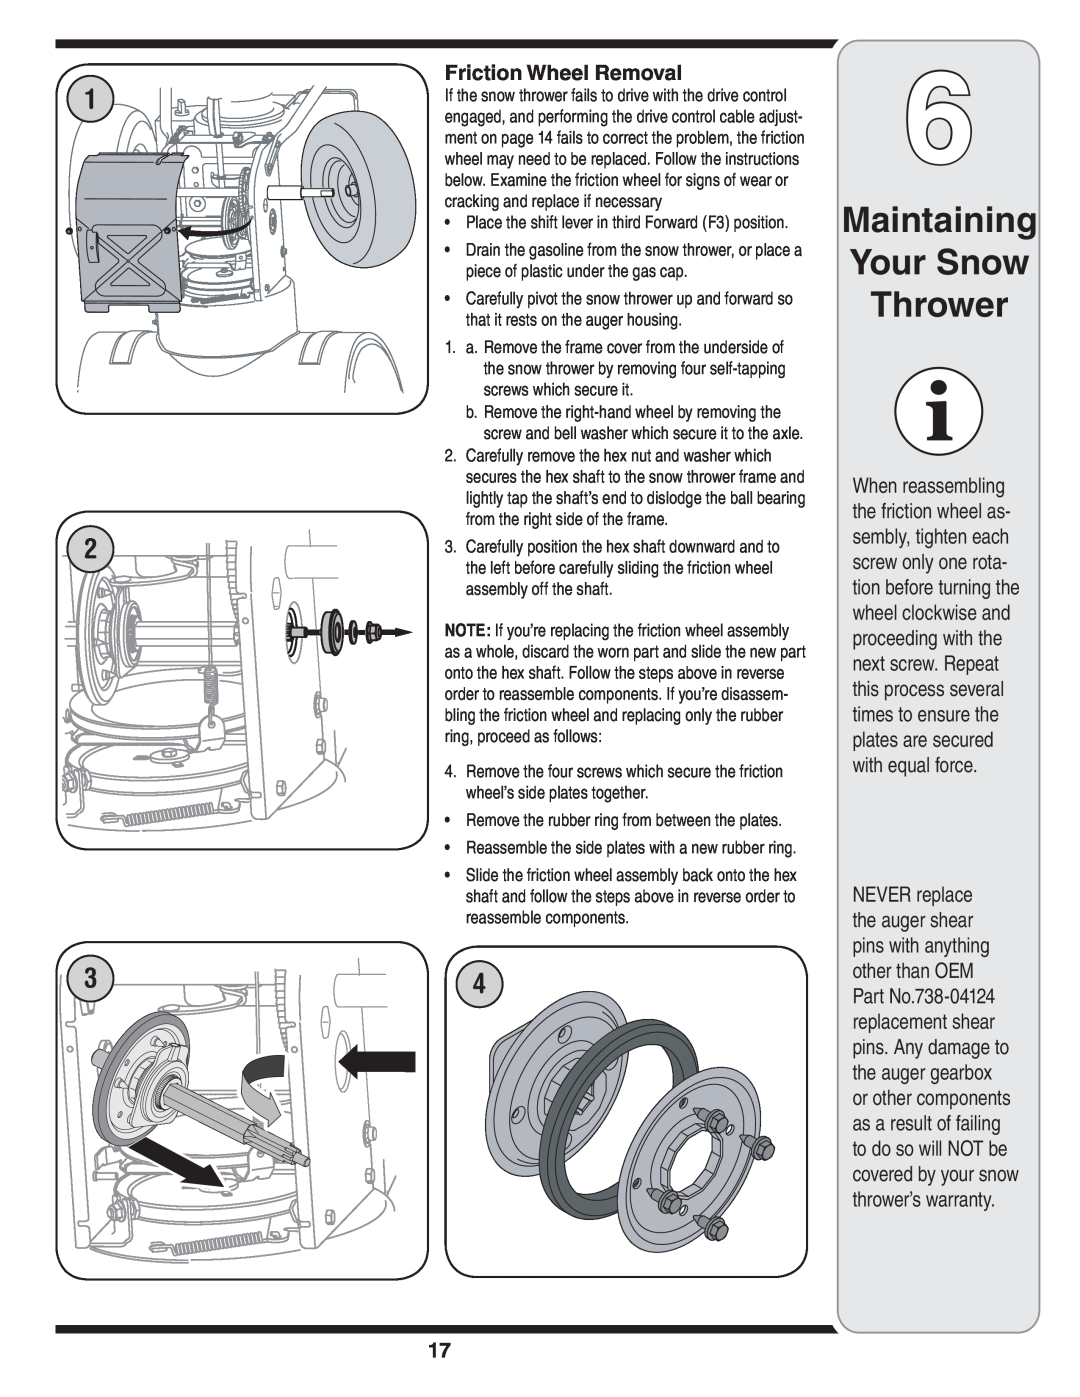 Bolens D Style Maintaining Your Snow Thrower, Friction Wheel Removal, Reassemble the side plates with a new rubber ring 